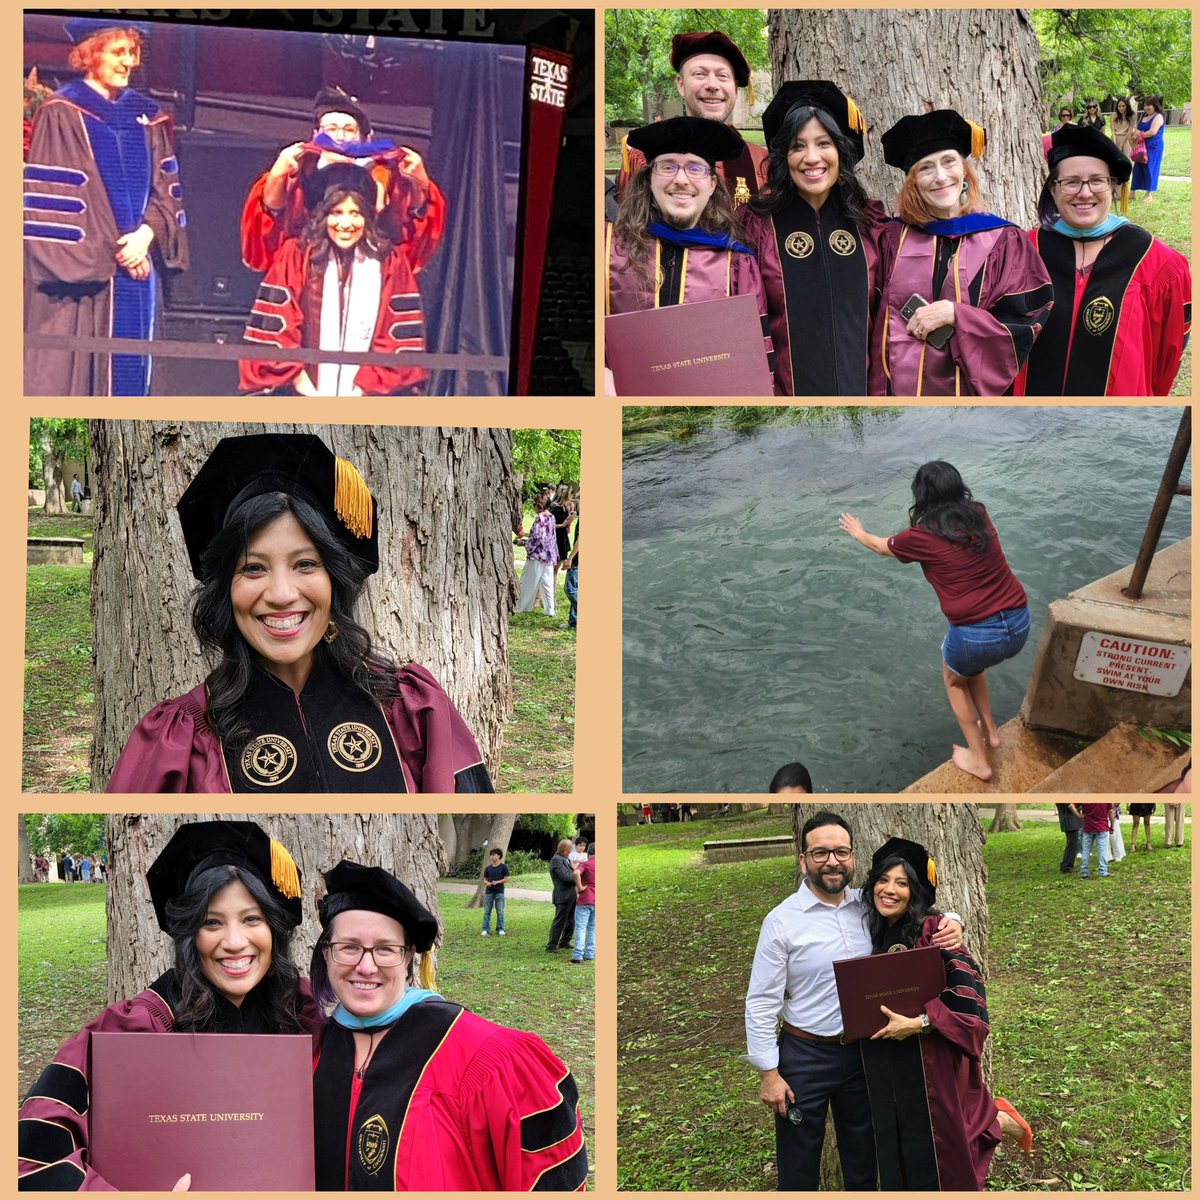 On May 10, 2024, I graduated with my PhD at Texas State University and did the graduation tradition of plunging into the San Marcos River. What a perfect ending to my doctoral student journey, and now I am ready for my PhD career🙌🏽! #PhDone #PhinisheD #doctora #phdlife